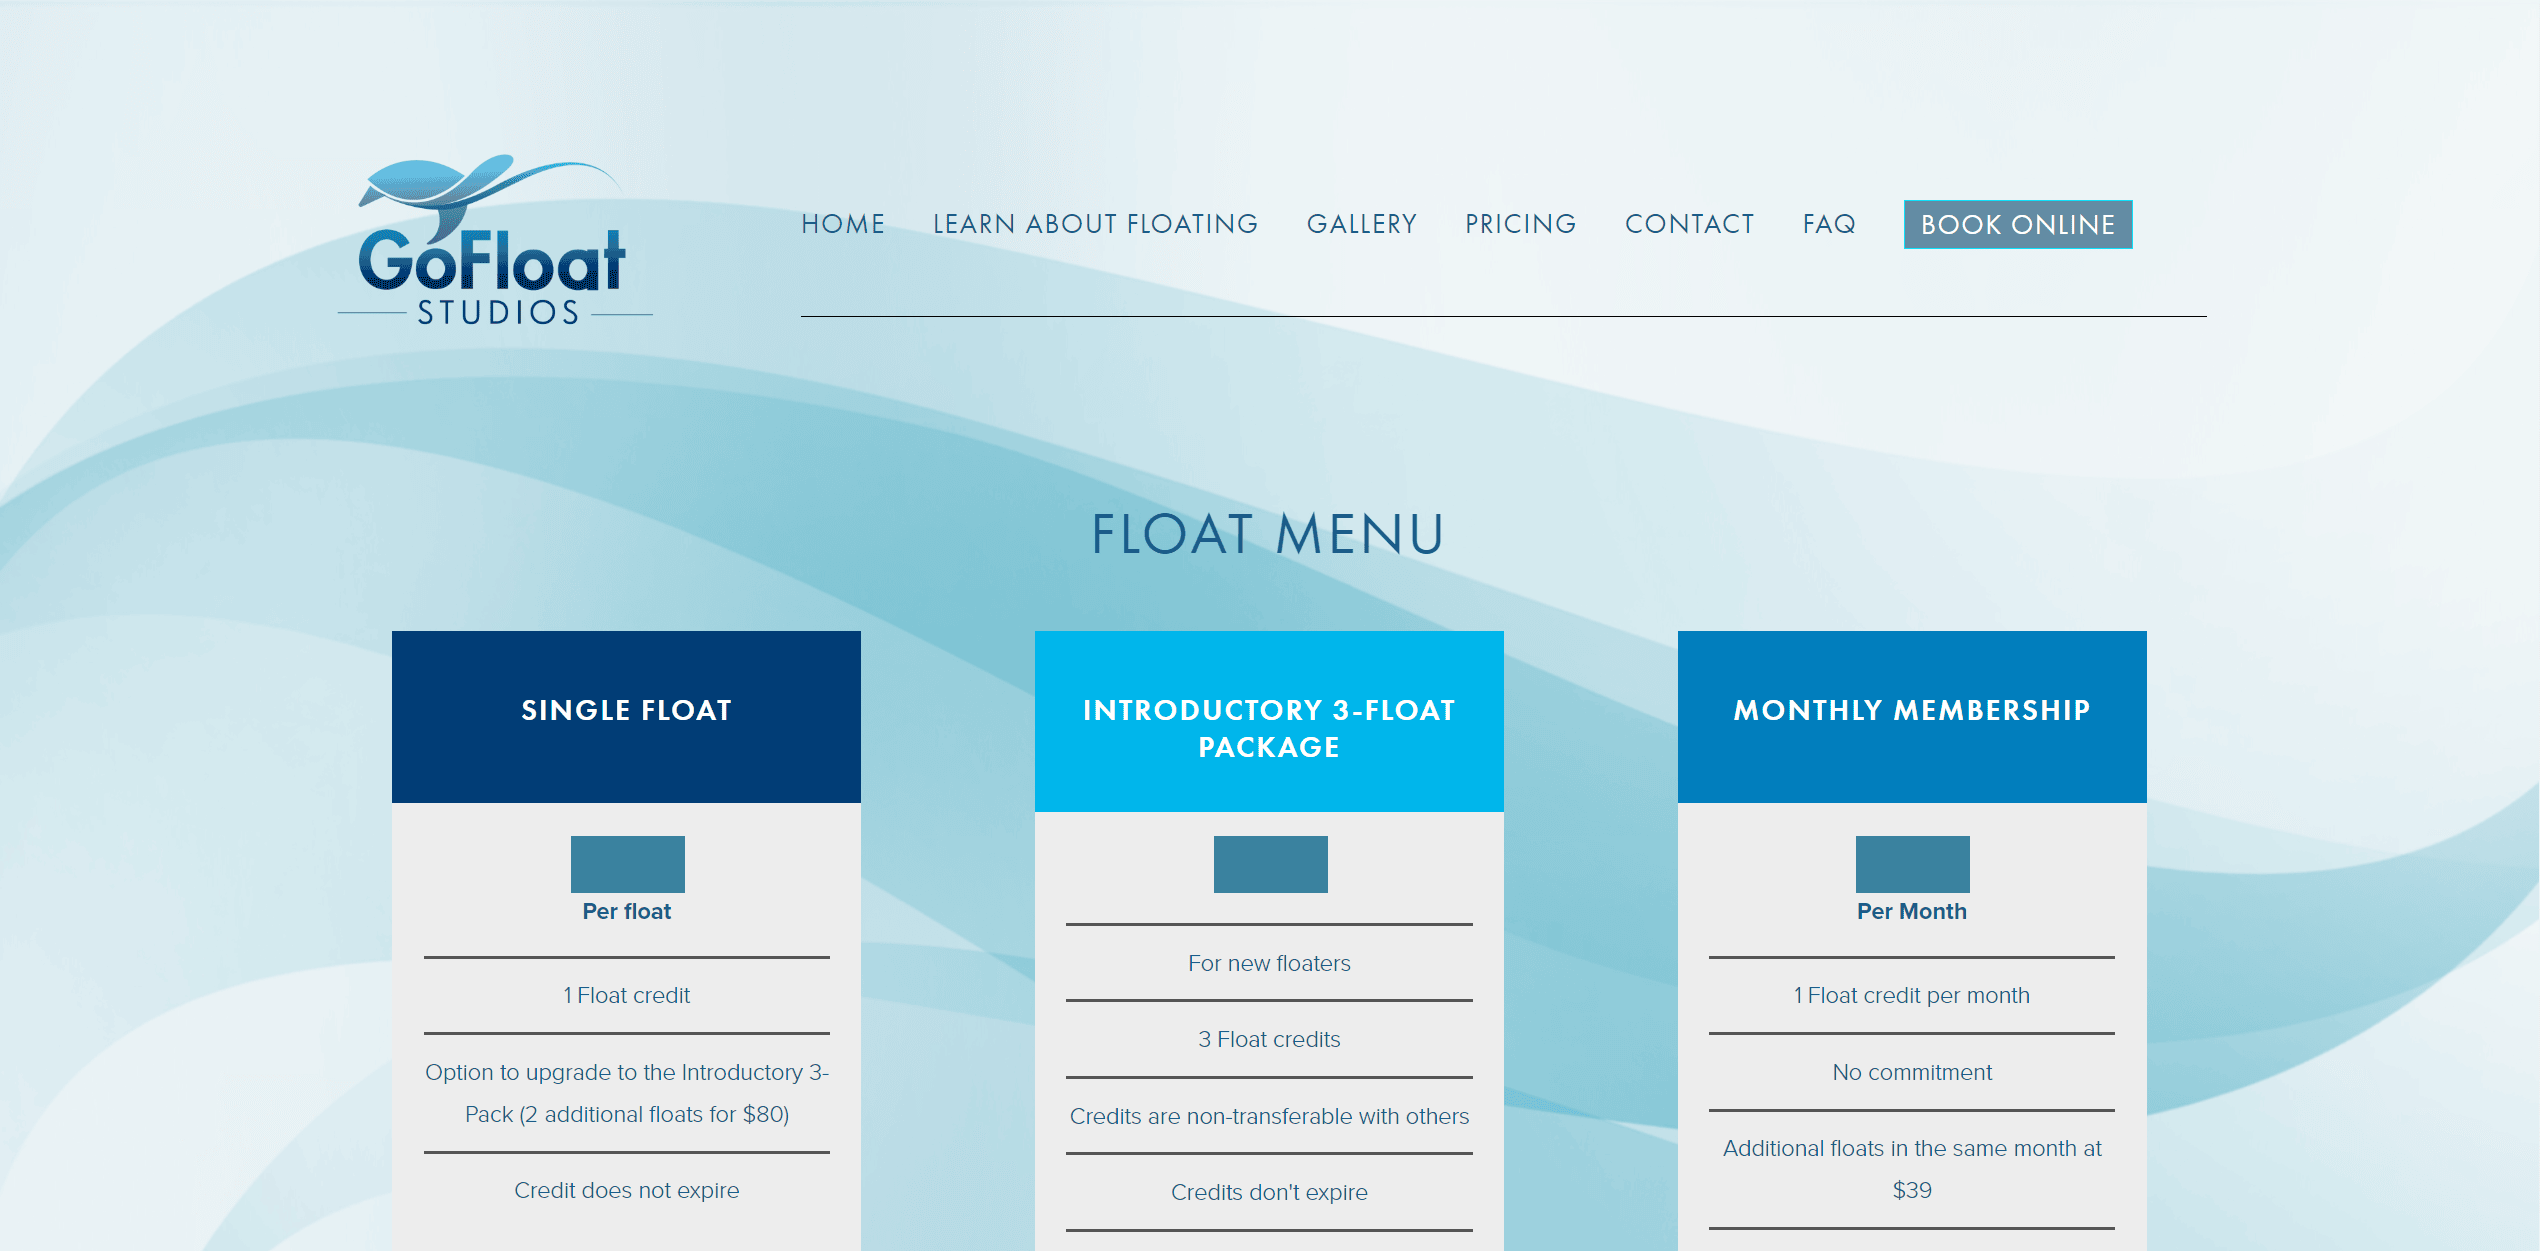 Pricing menu of floating services and packages.